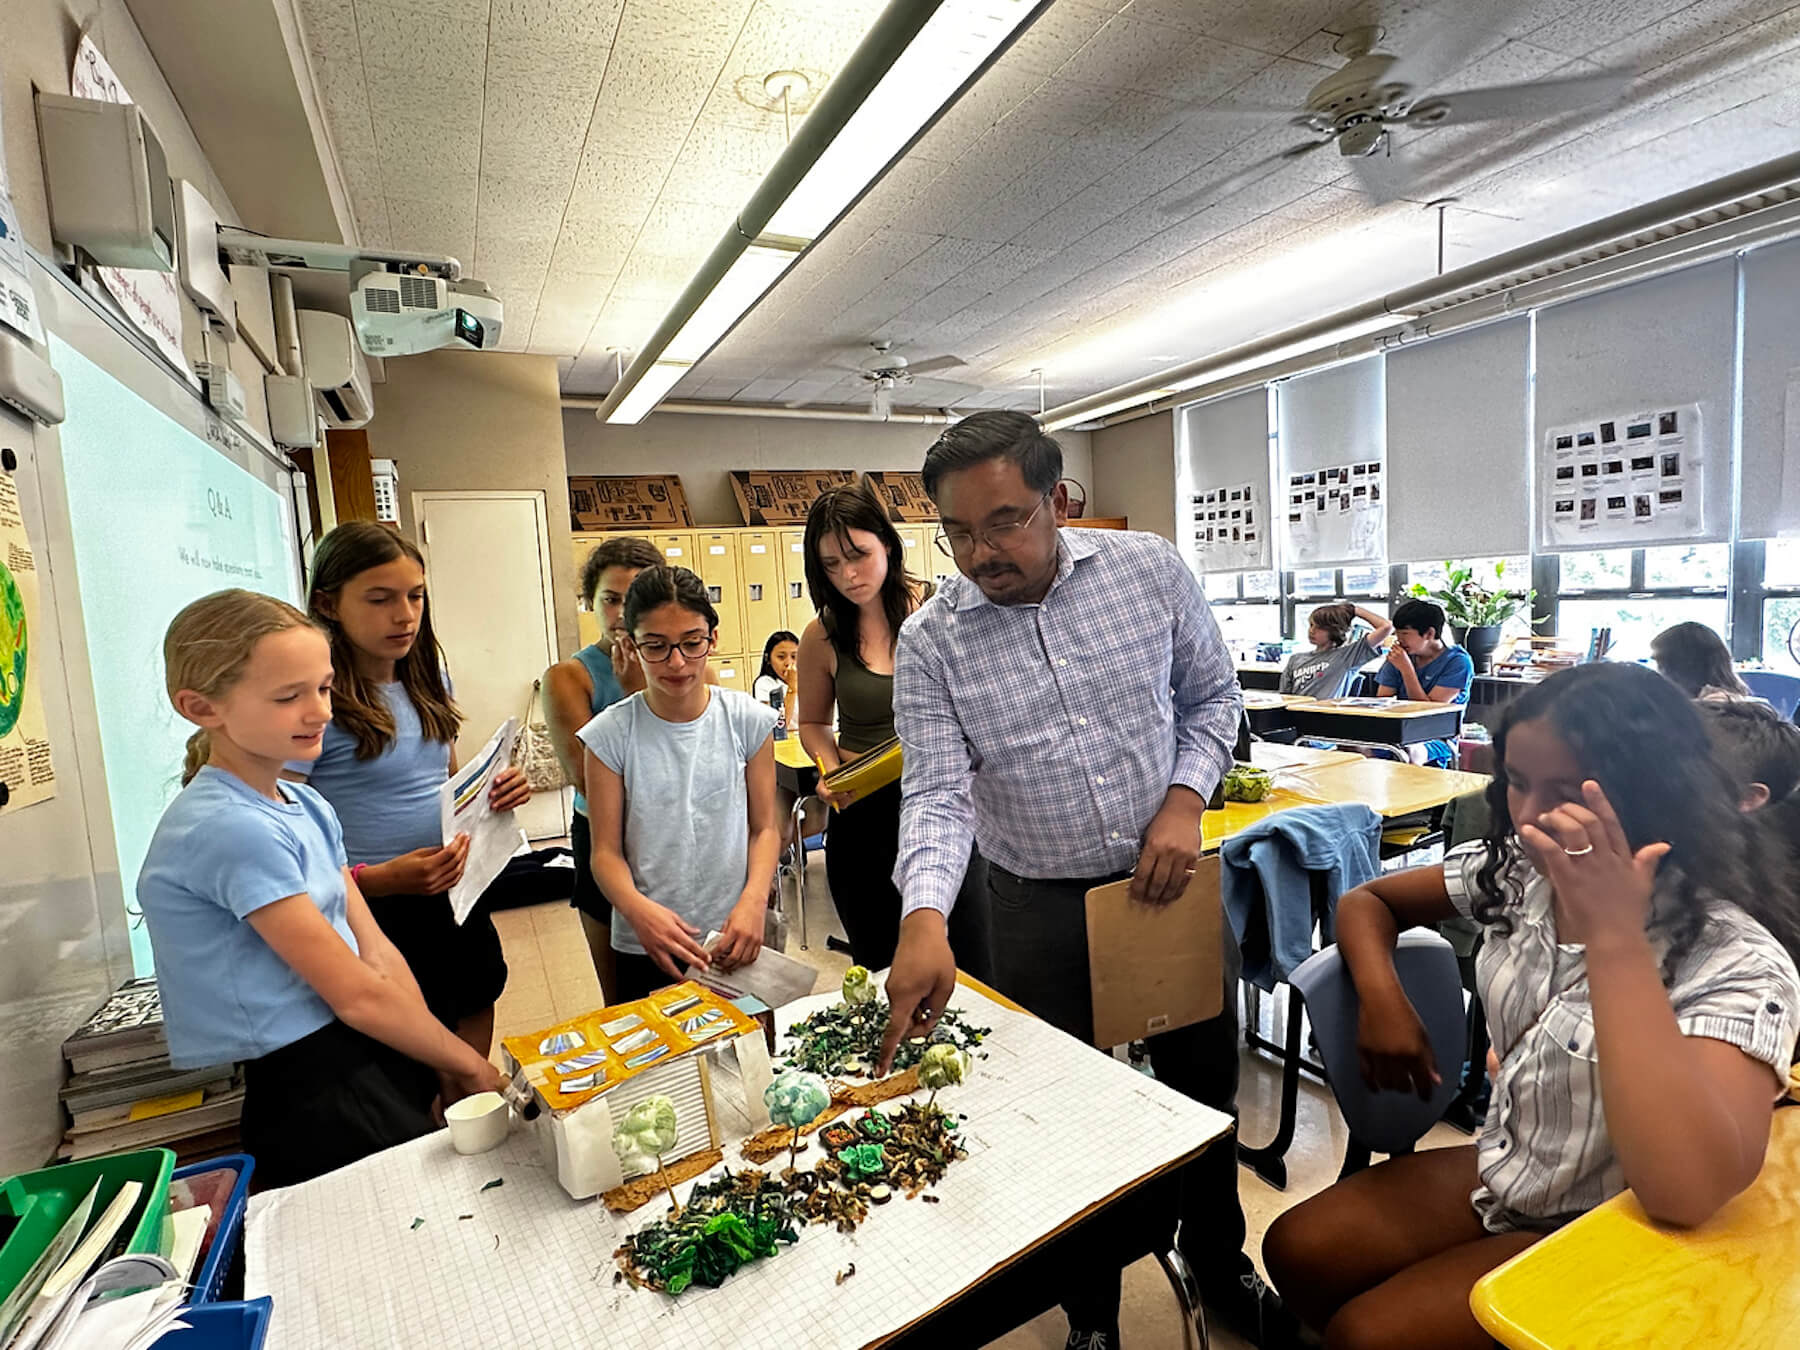 Assistant Principal Shawn Chisty observes Fieldston Lower students' Shark Tank project model.